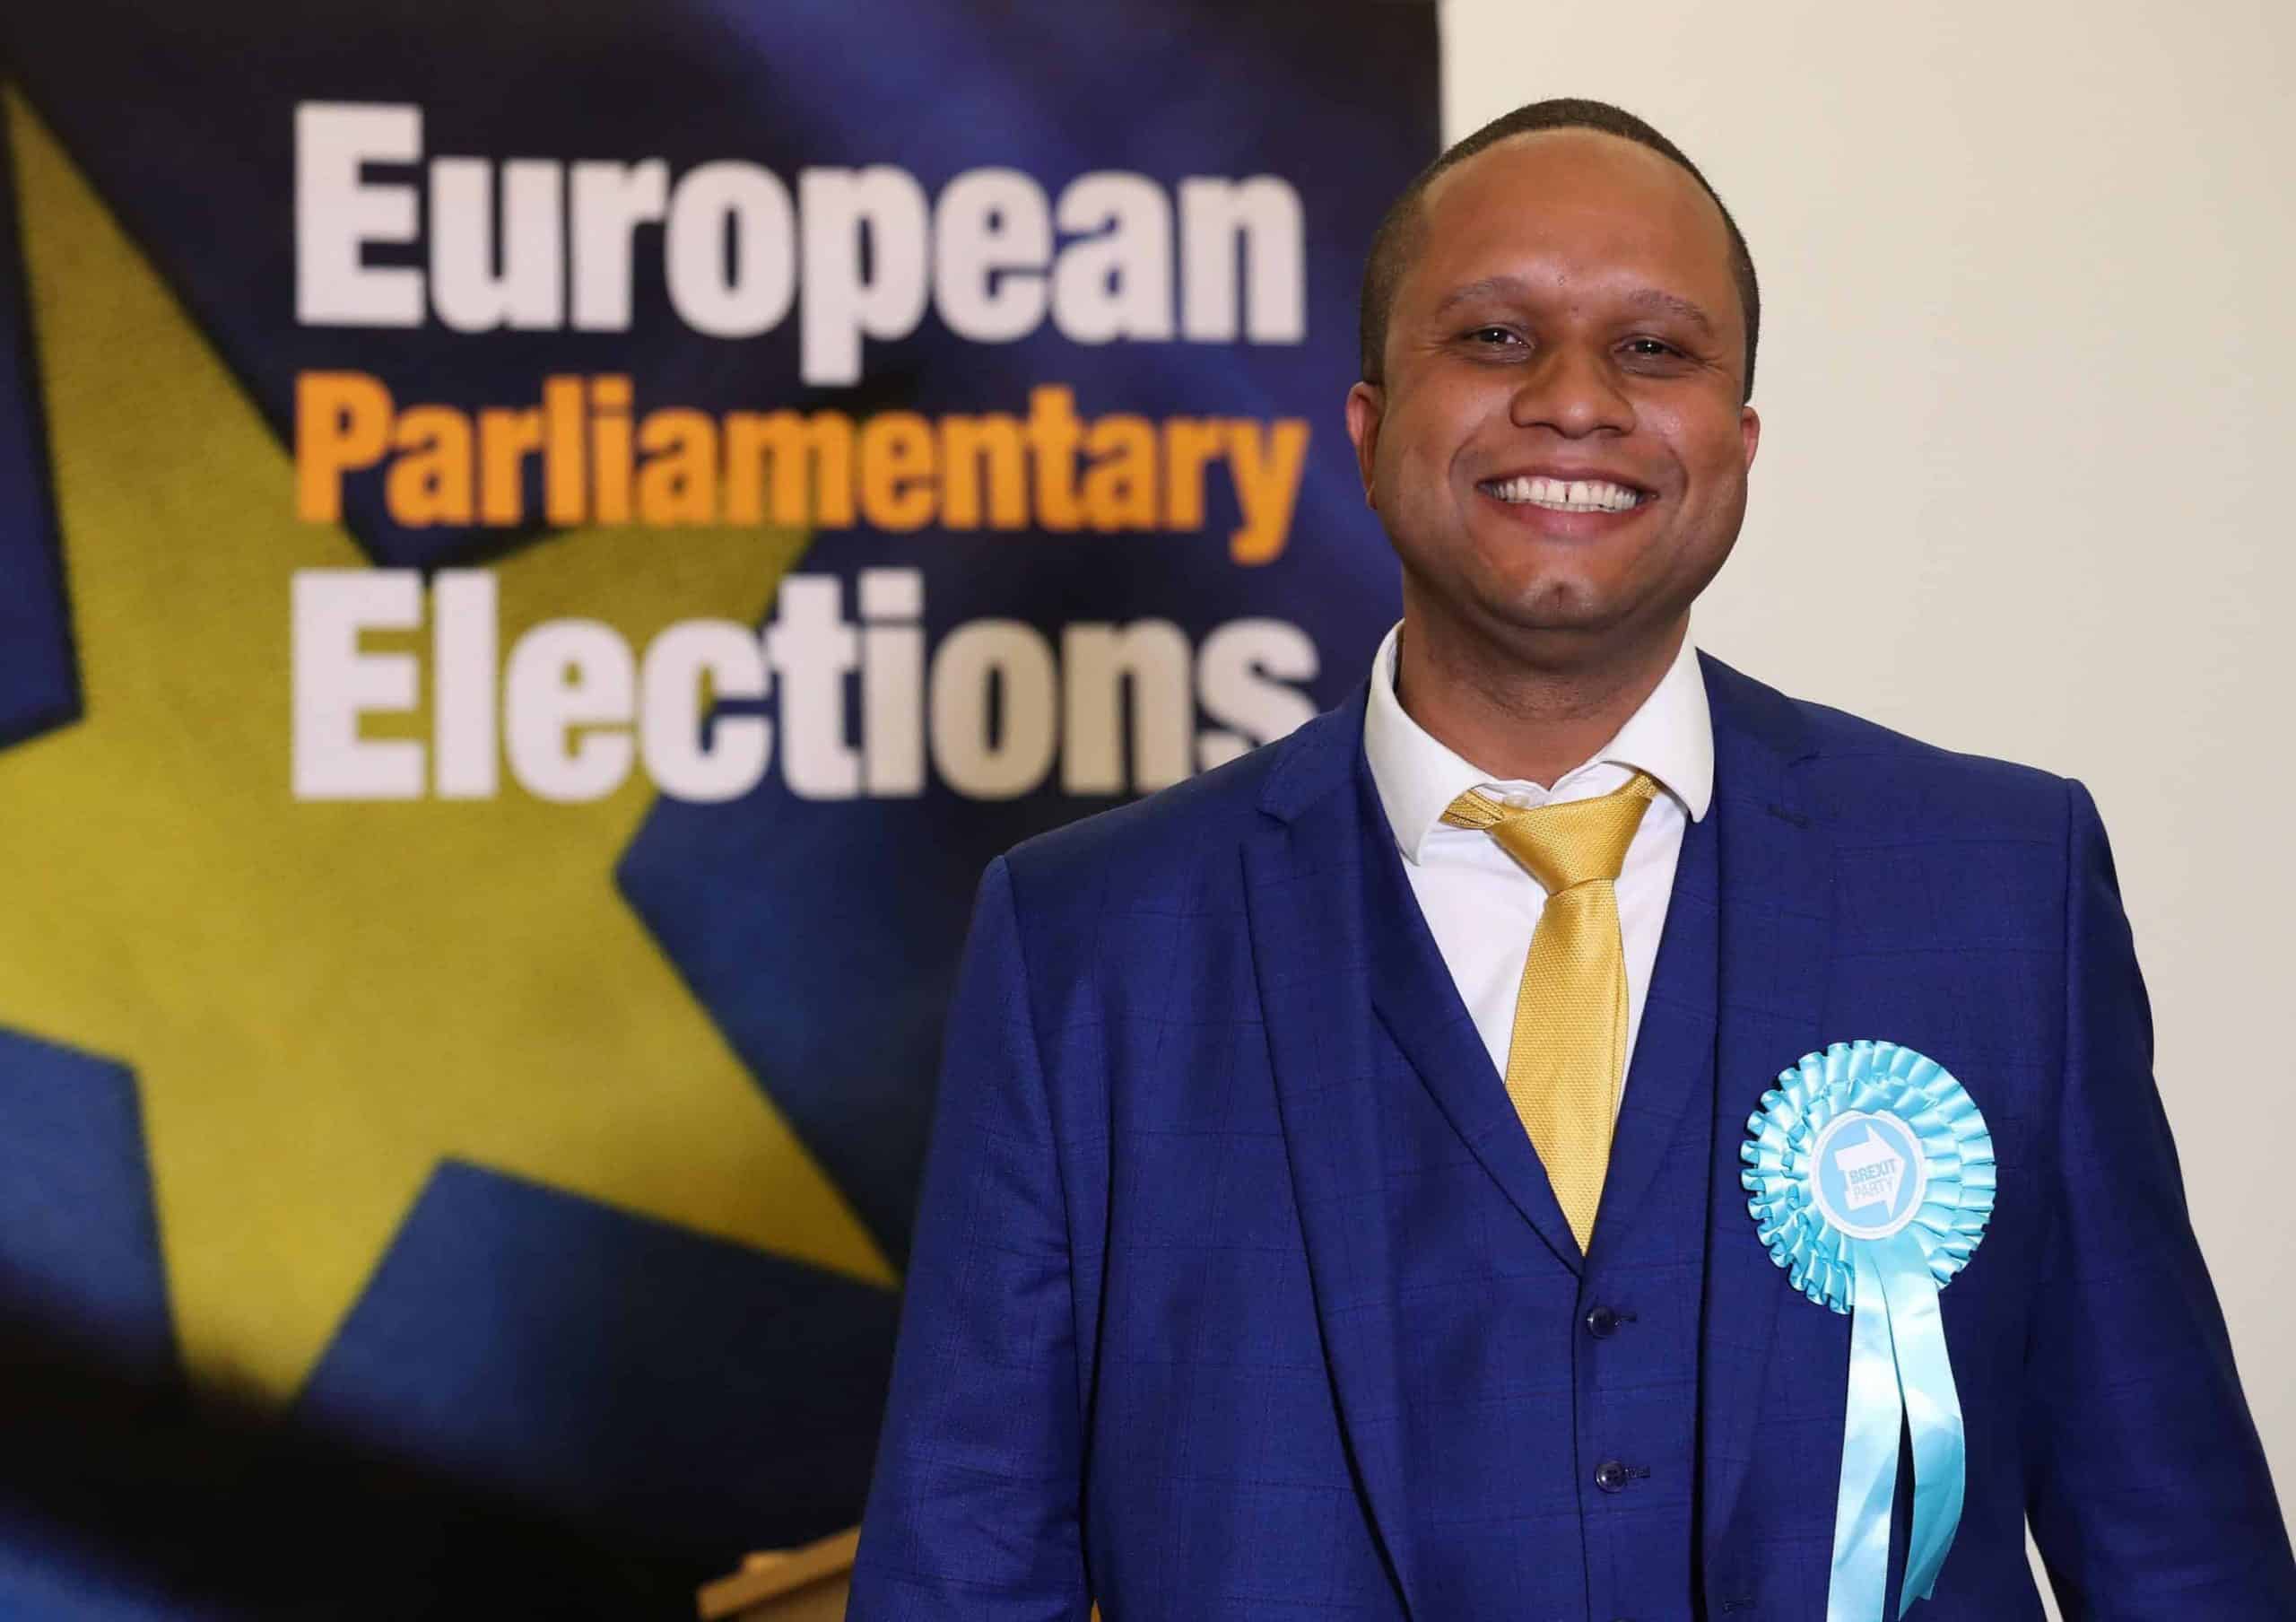 MEP quits Brexit Party over ‘direct conflict’ of views